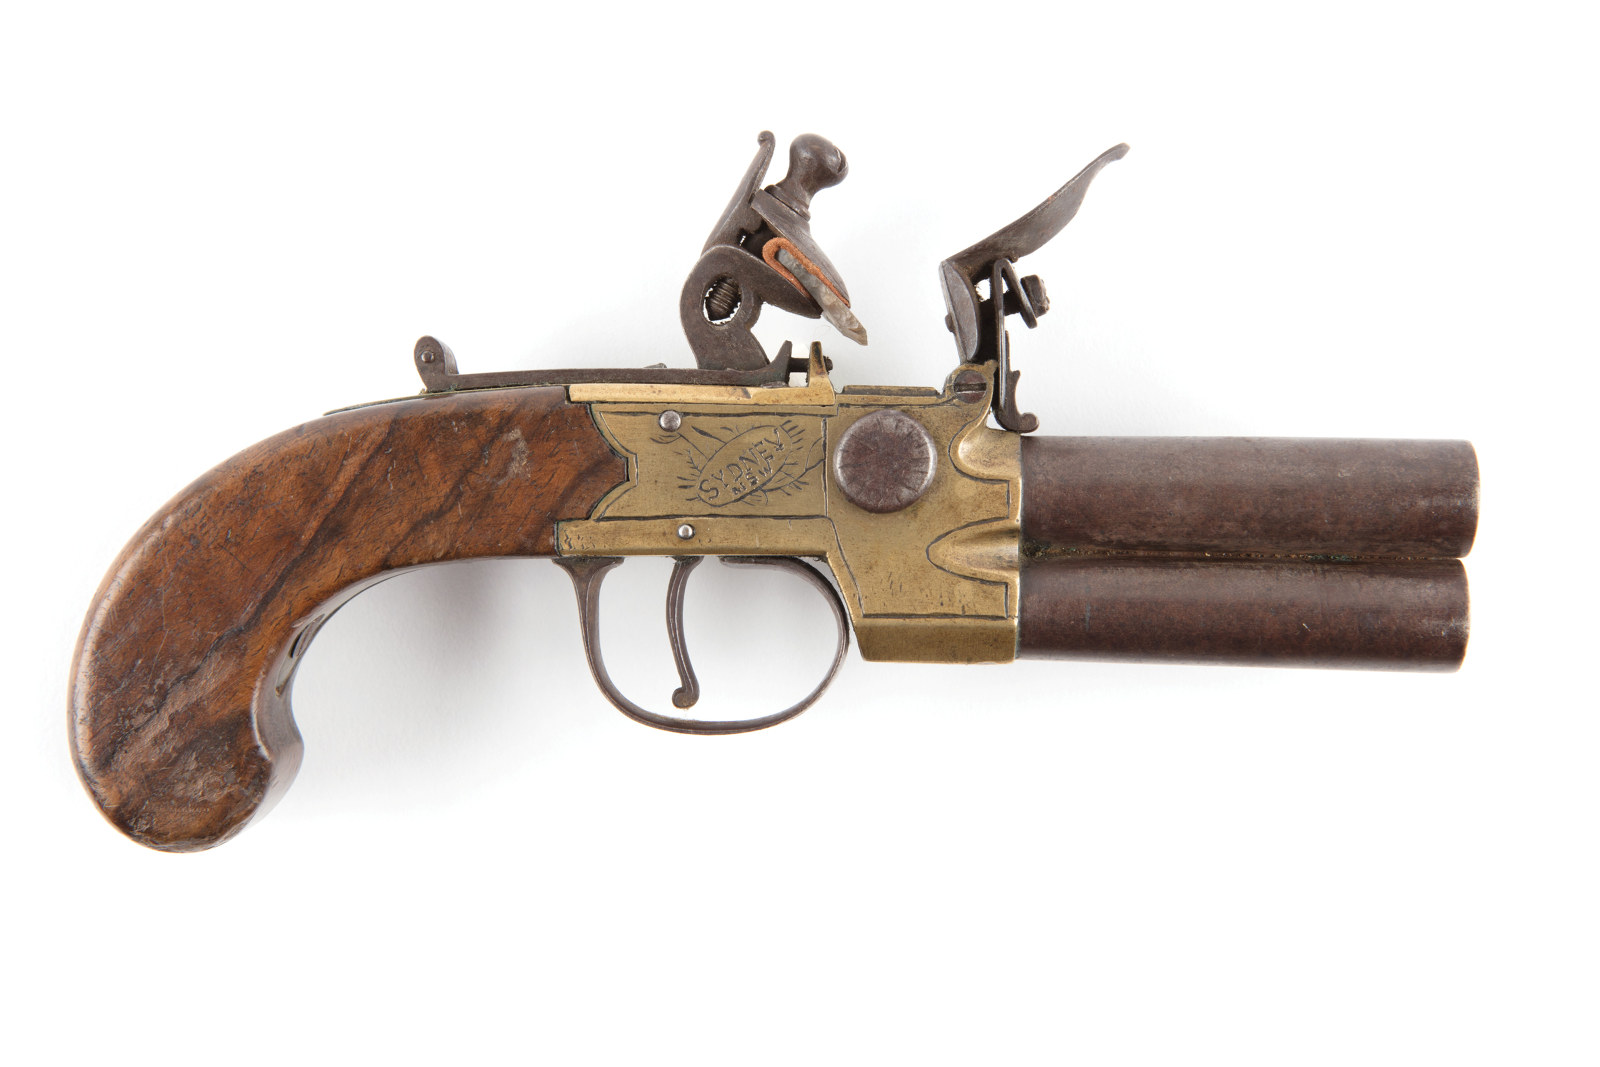 Wood and brass pistol.